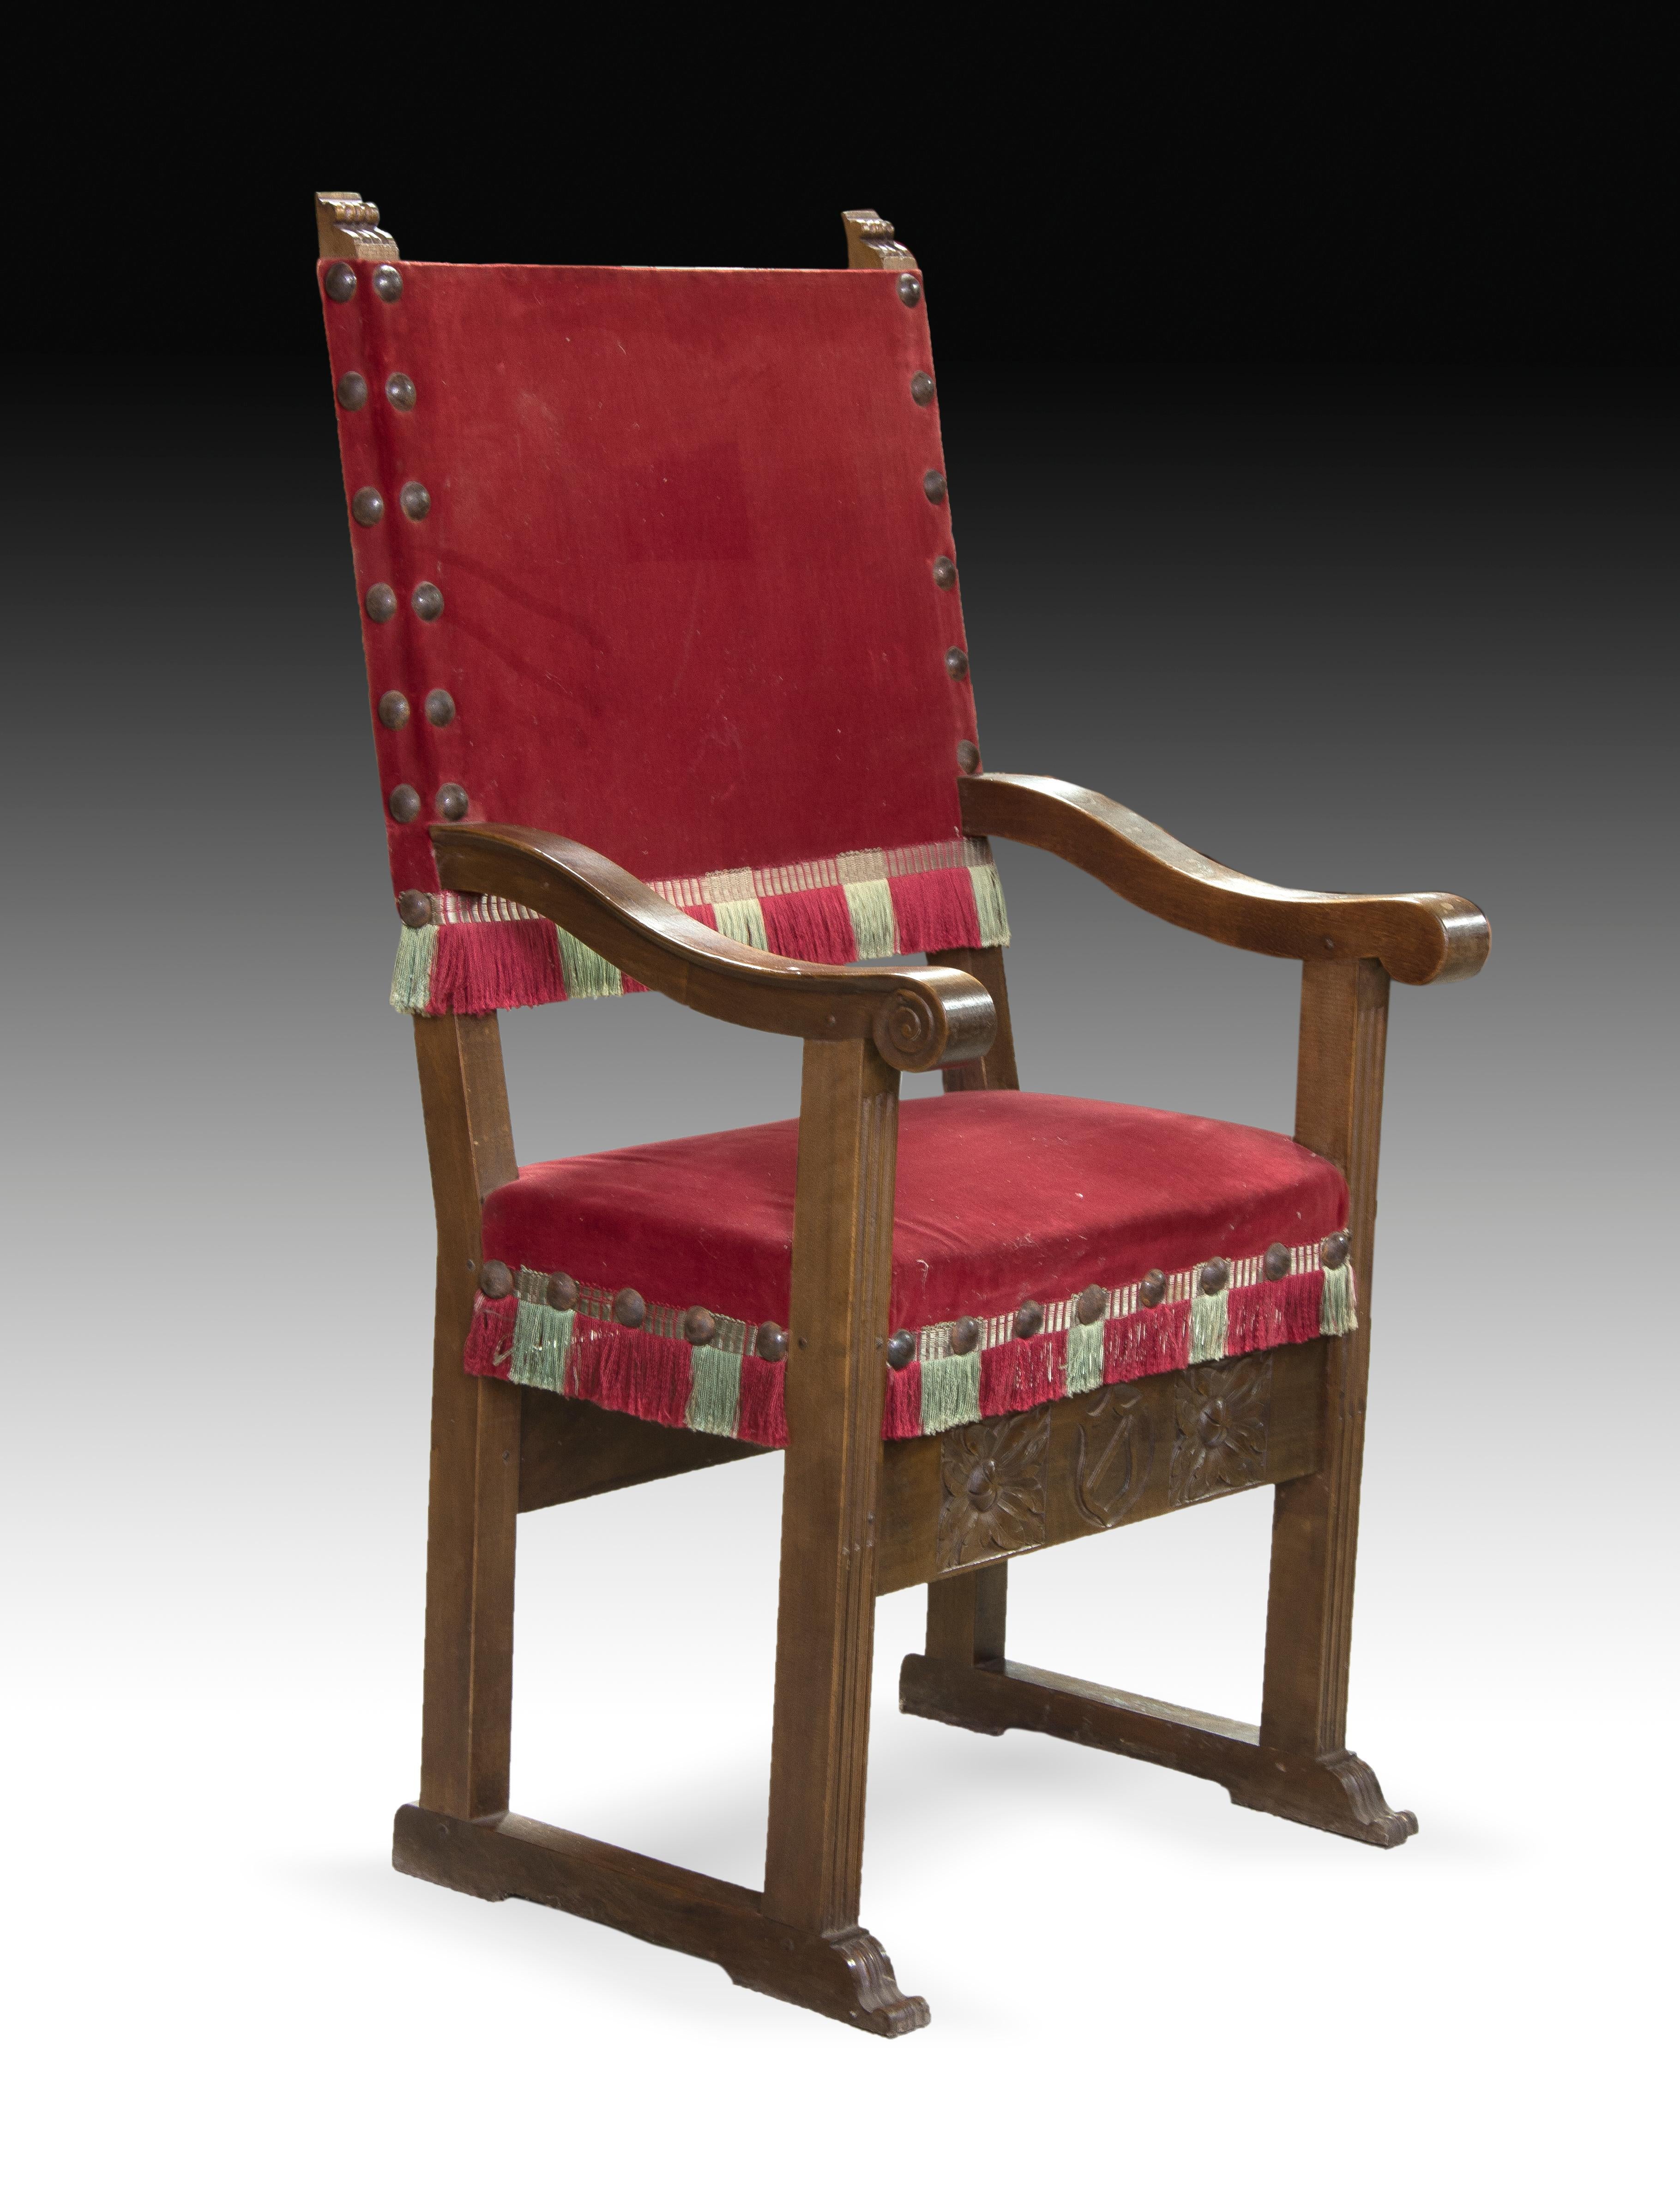 This type of seat was very common in Spain despite its Italian origin. The typology was introduced in the 16th century, and remained as usual in Spanish furniture during the following centuries, becoming really popular in the 19th and 20th centuries